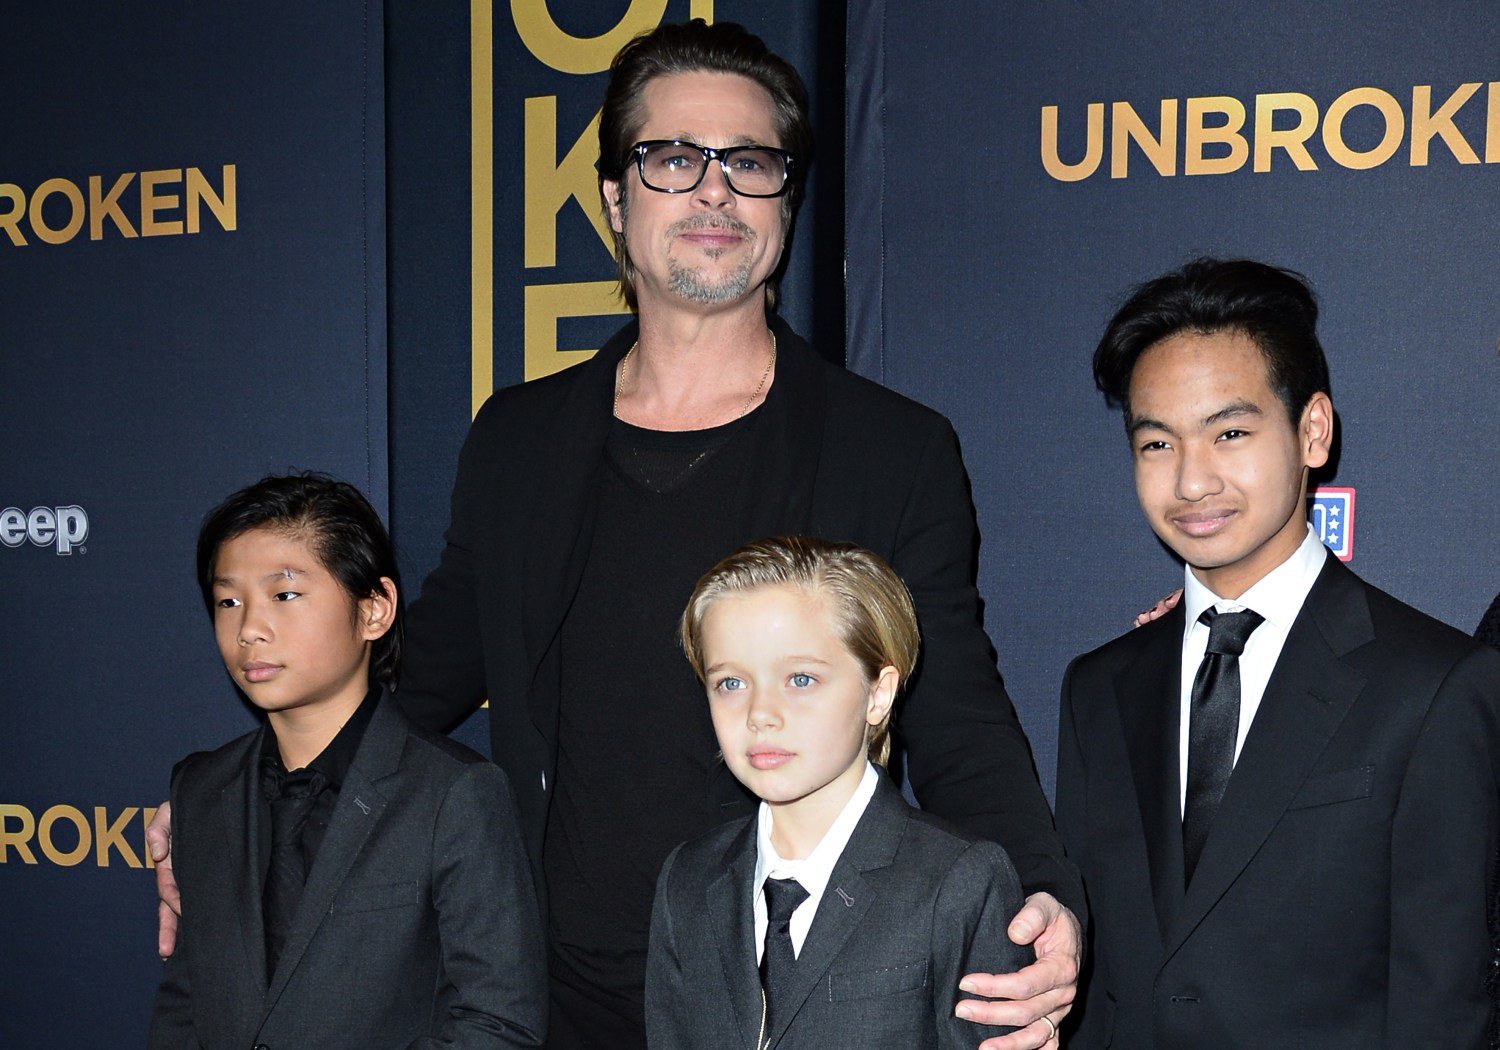 Shiloh Jolie-pitt Wows In Dance Video After Name Change And Reinvention